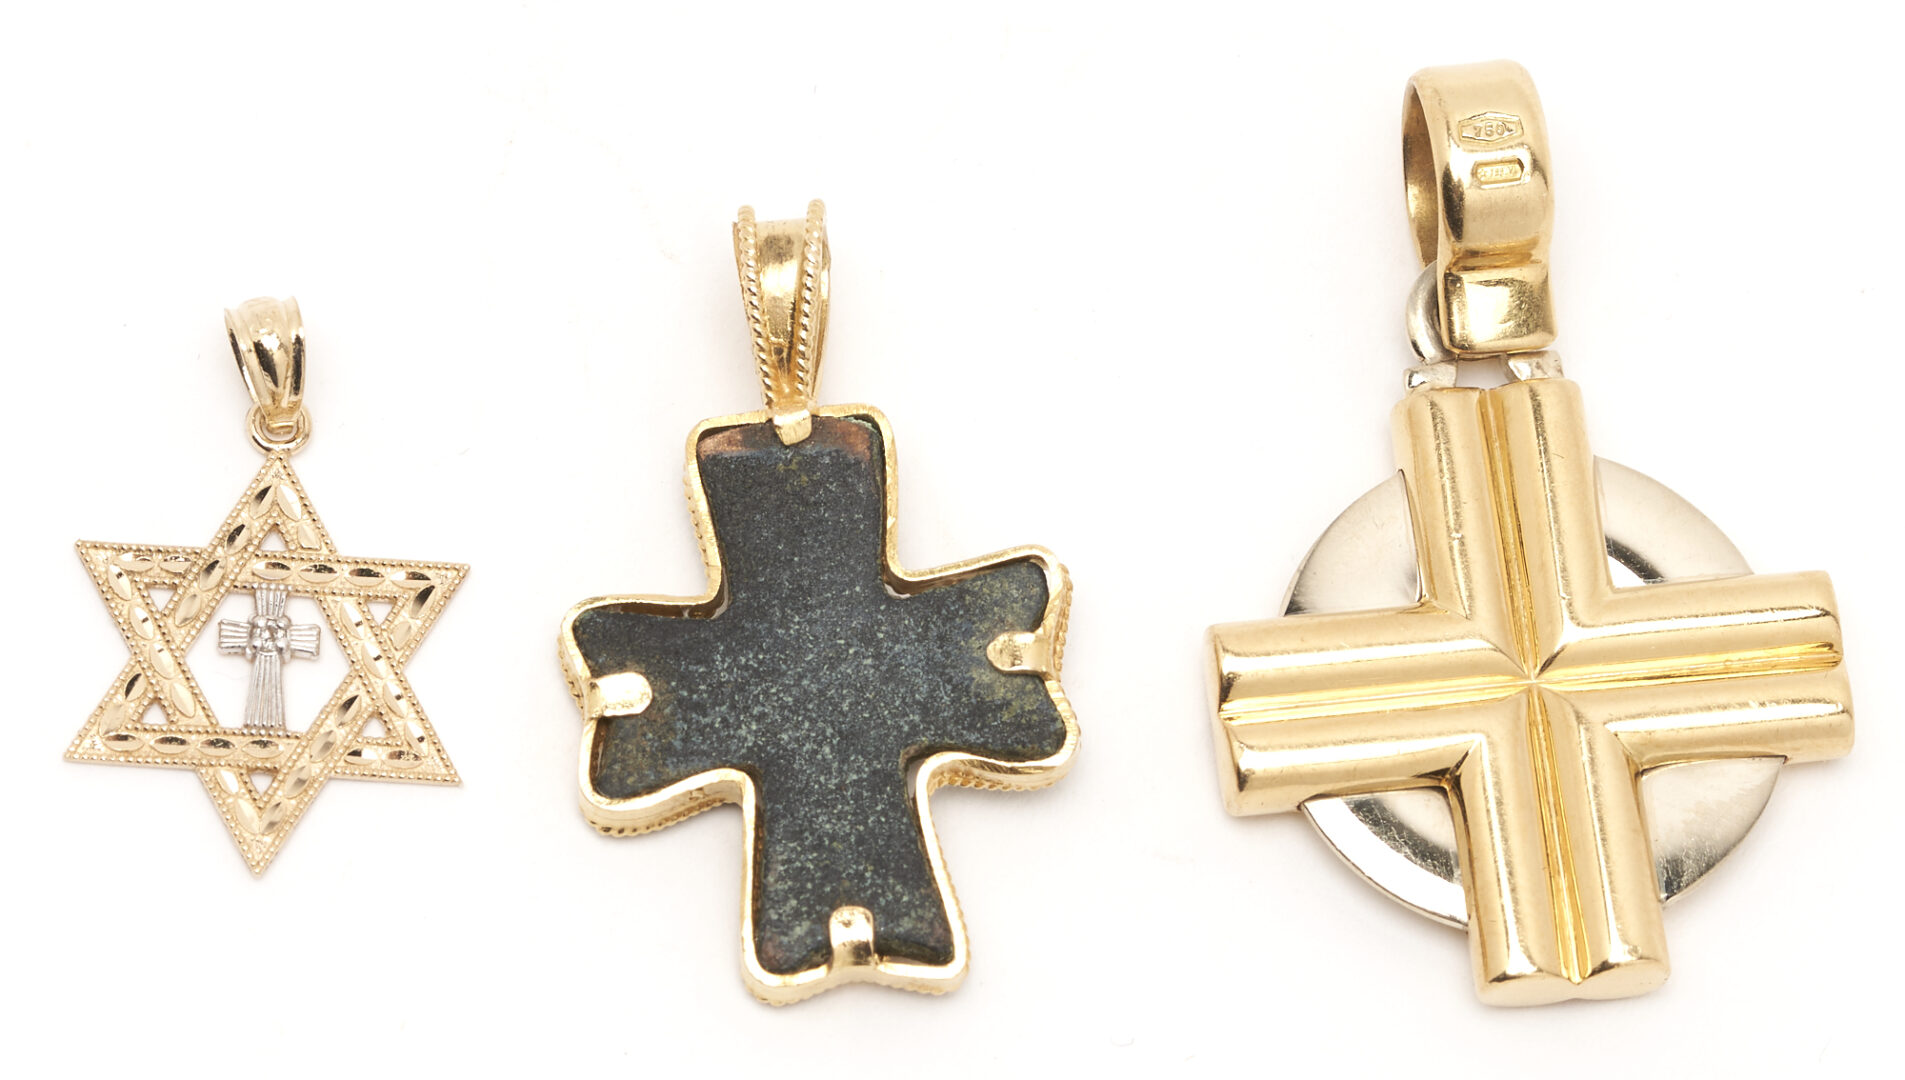 Lot 771: Assembled Grouping of Gold Religious Cross Pendants, 7 total